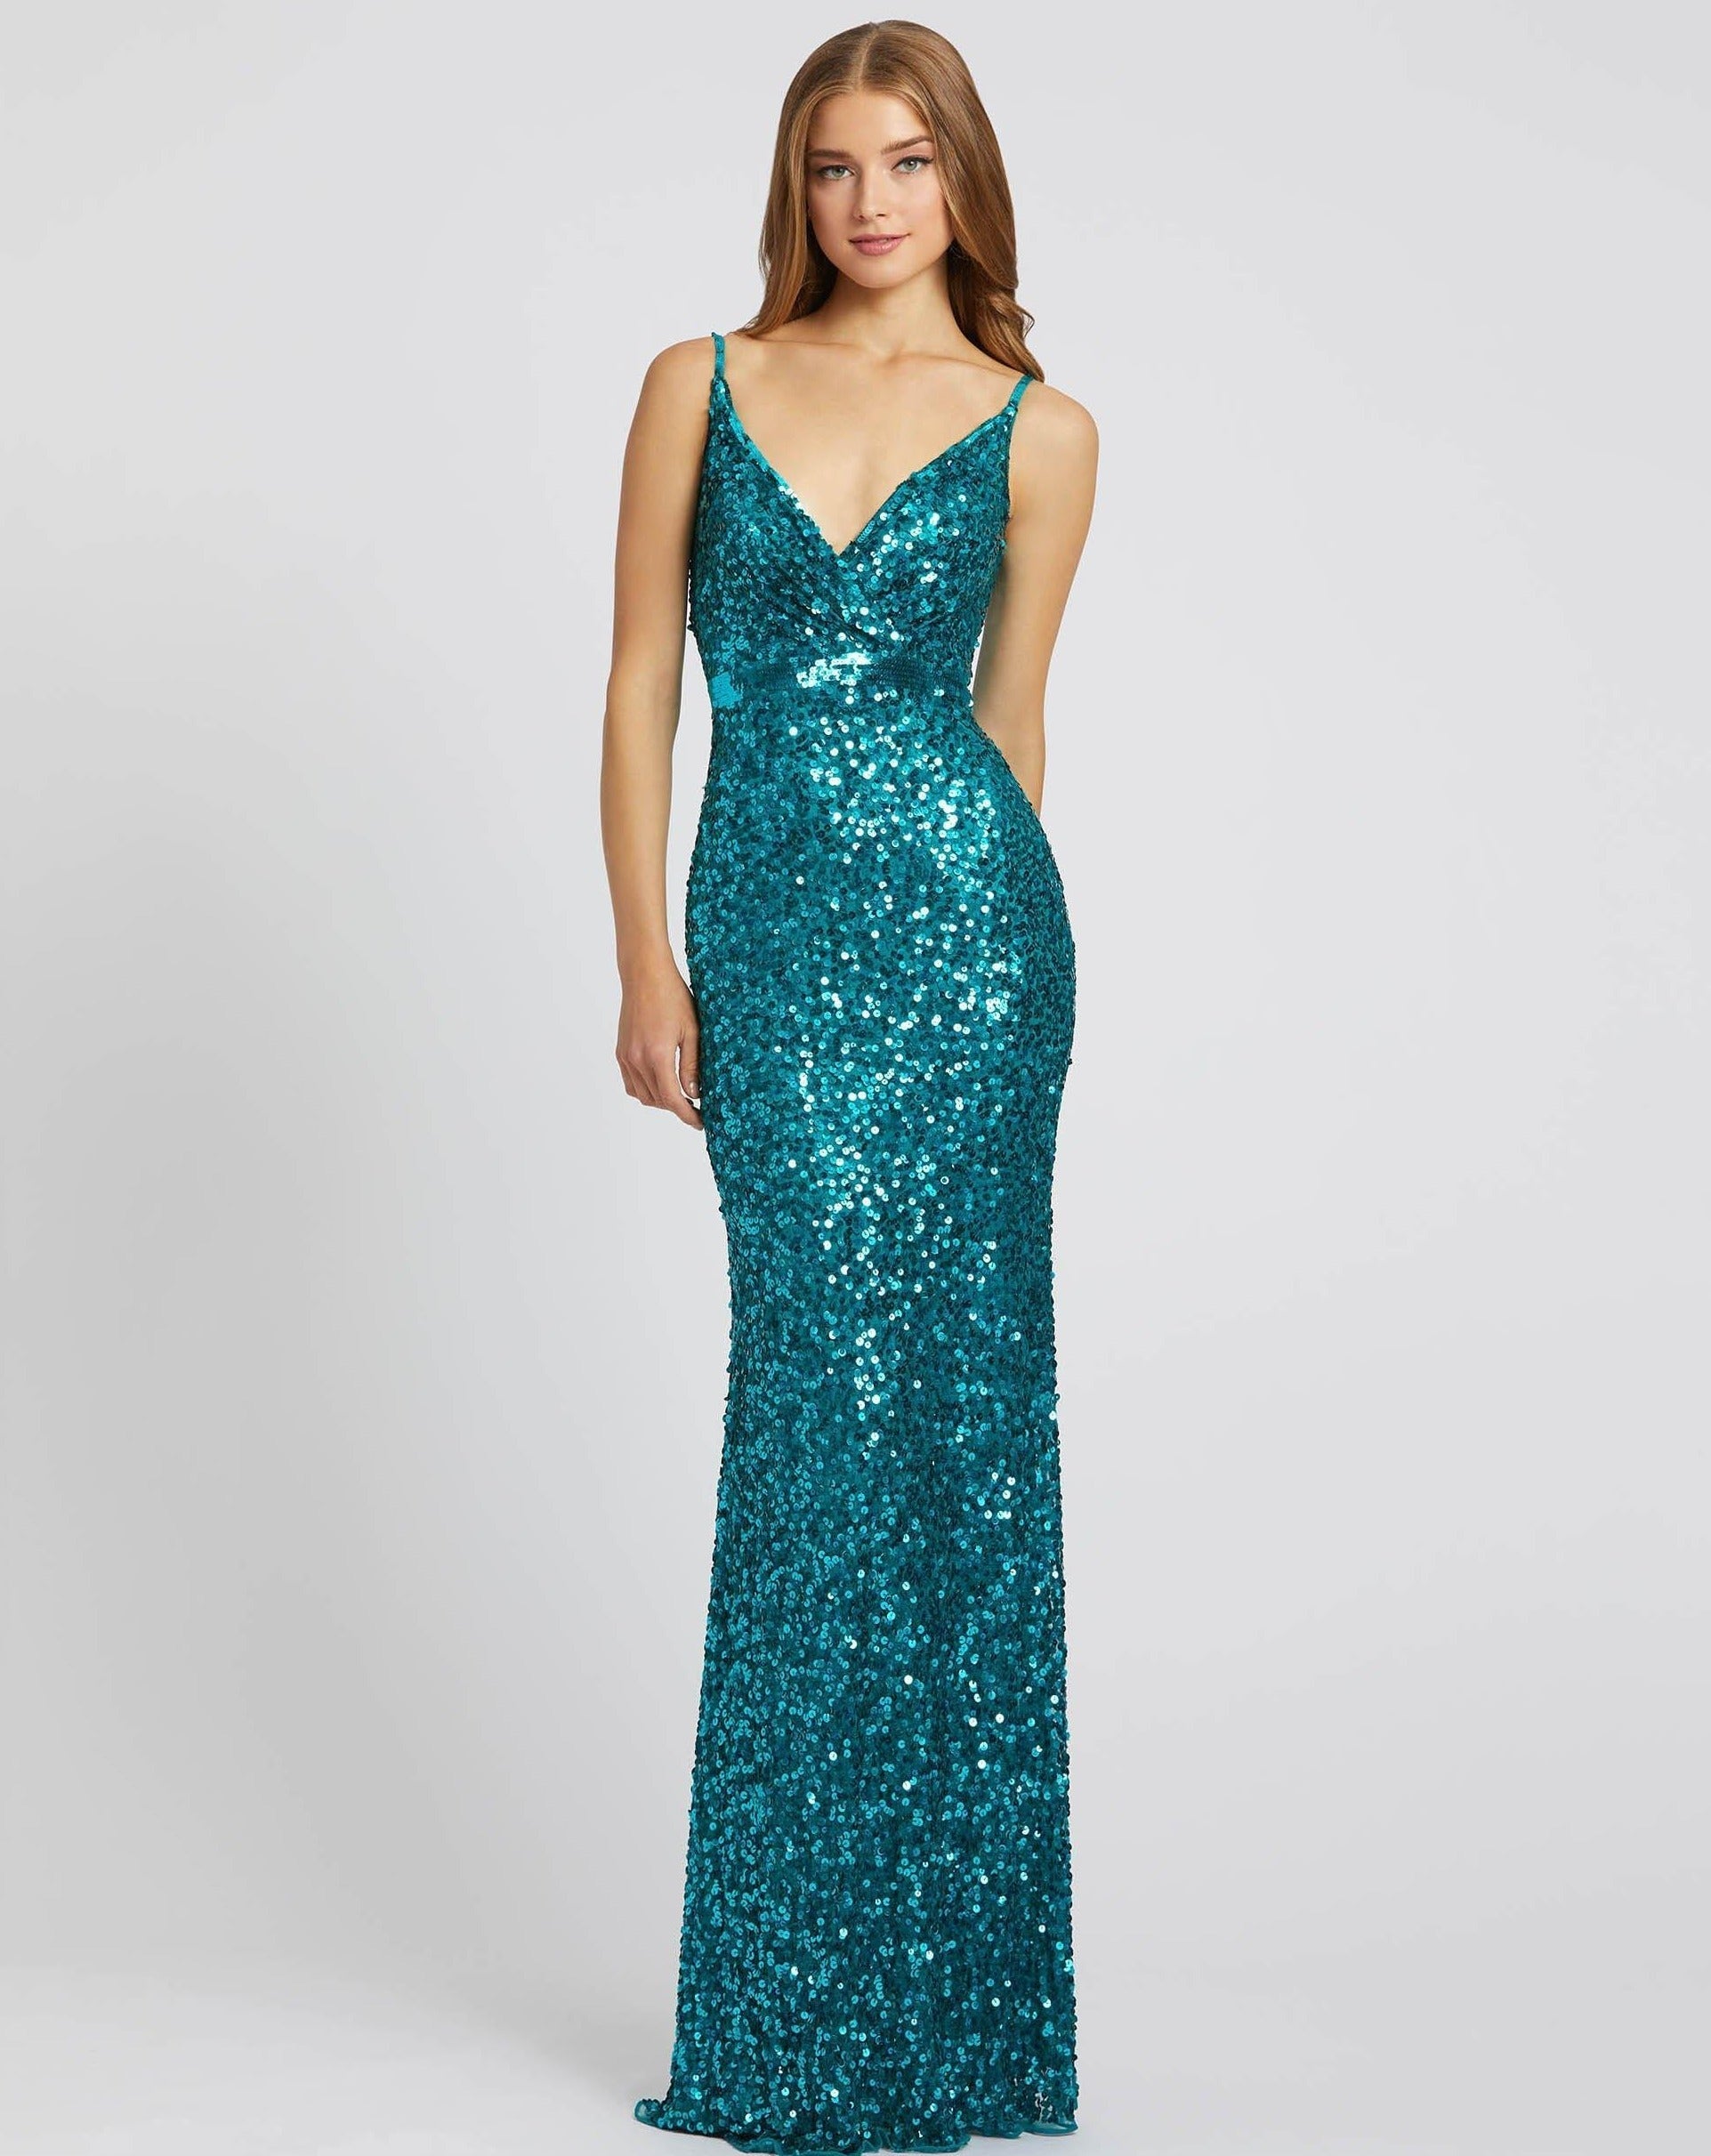 Mac Duggal Prom Long Spaghetti Strap Dress 5055 - The Dress Outlet